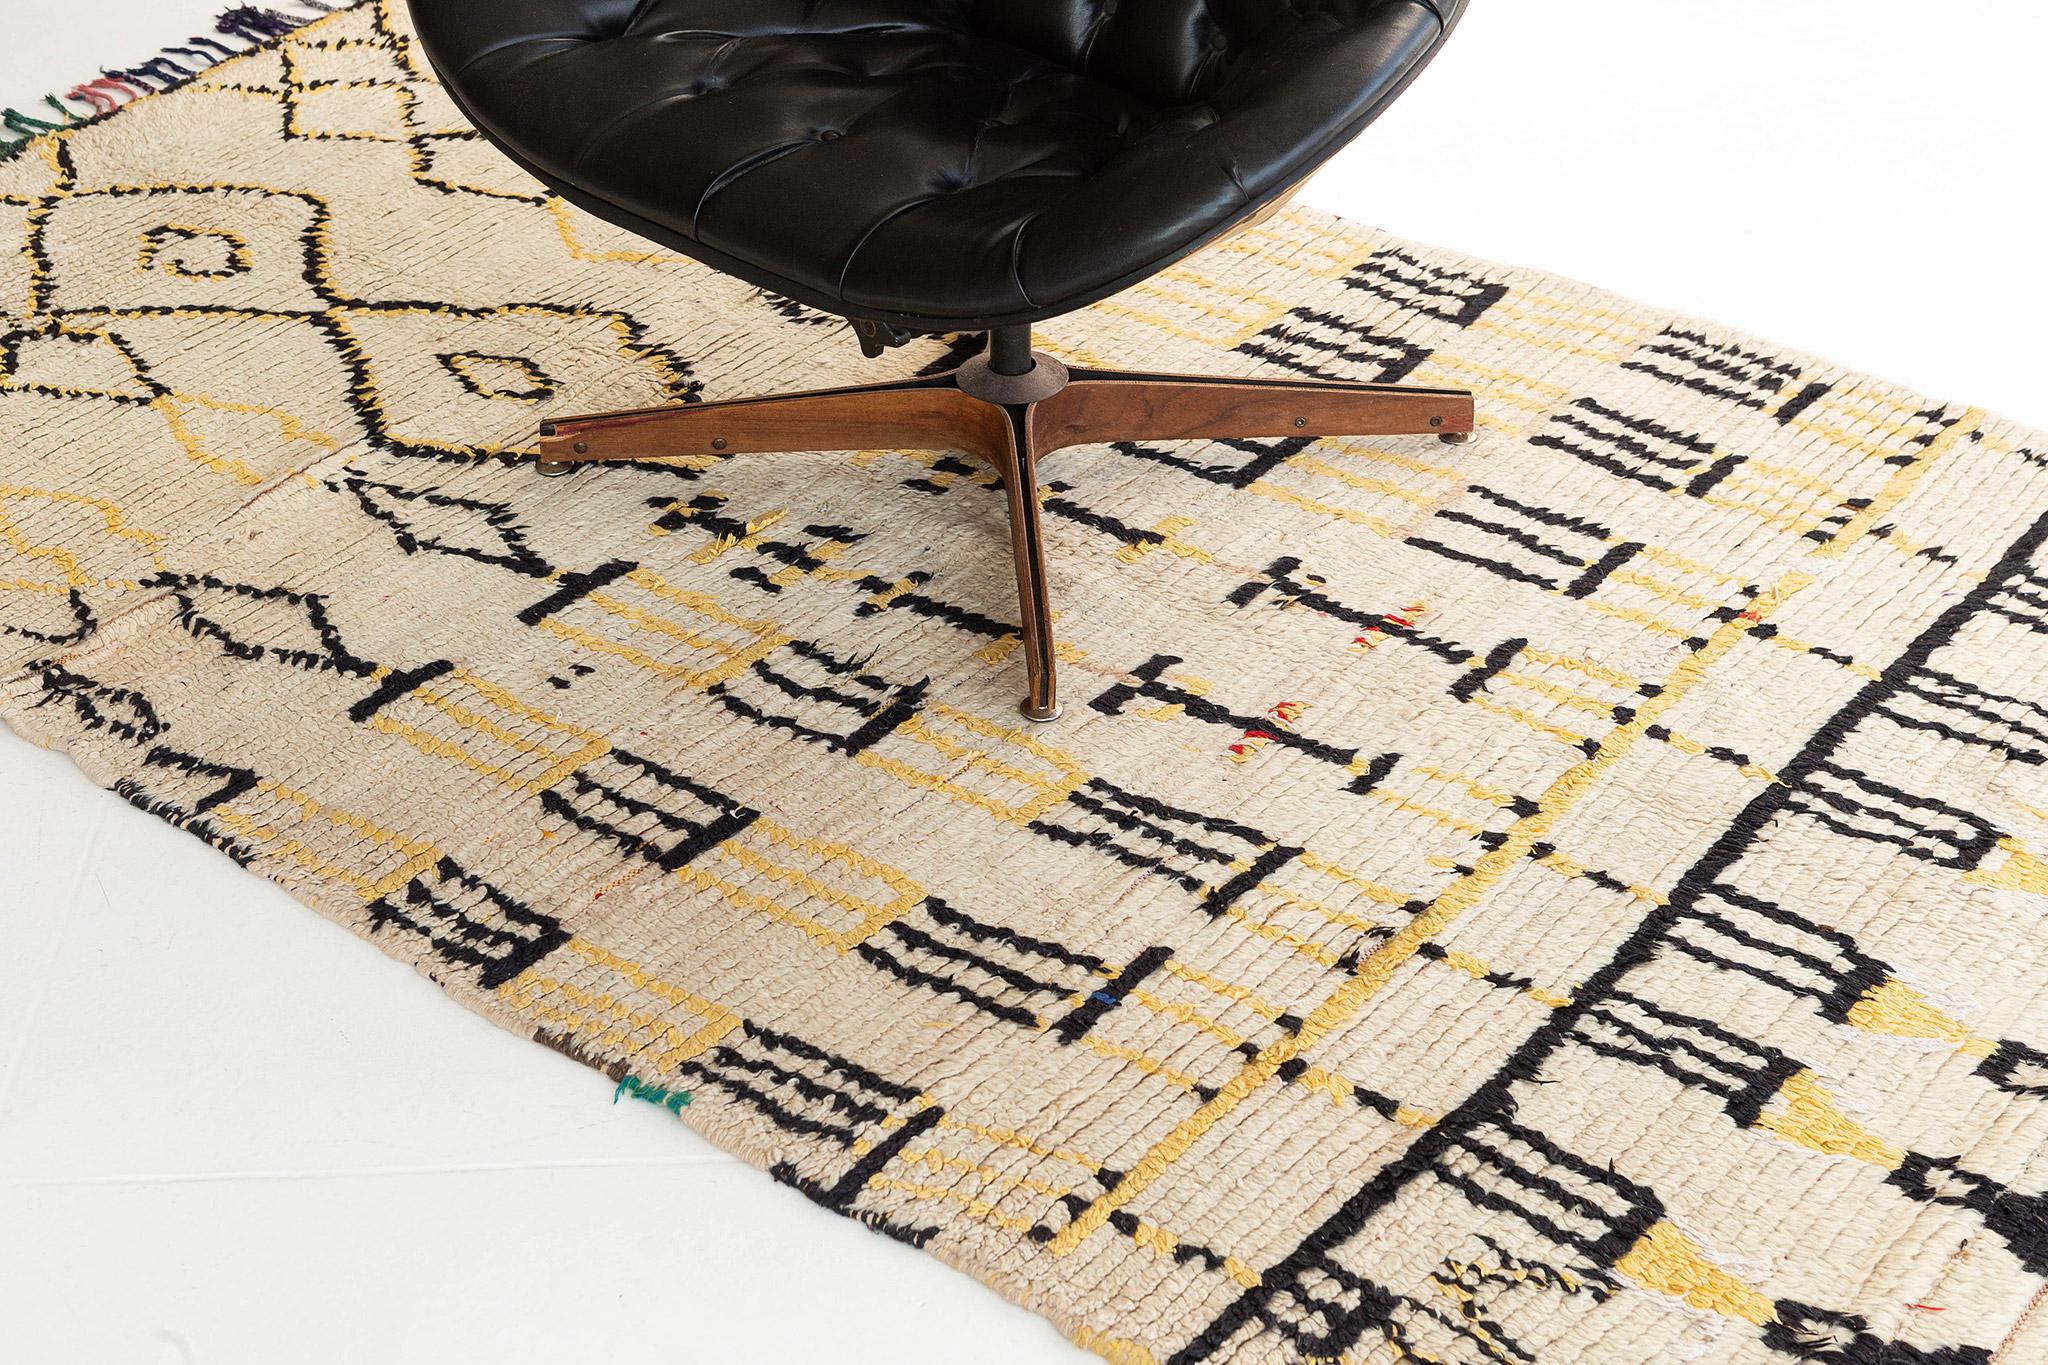 With its primitive charm and enticing asymmetry, this Vintage Moroccan Azilal Tribe rug features a visually impeccable design. This exceptional rug displays a stunningly symbolical patterns woven in the warm tones of ivory, charcoal and yellow.